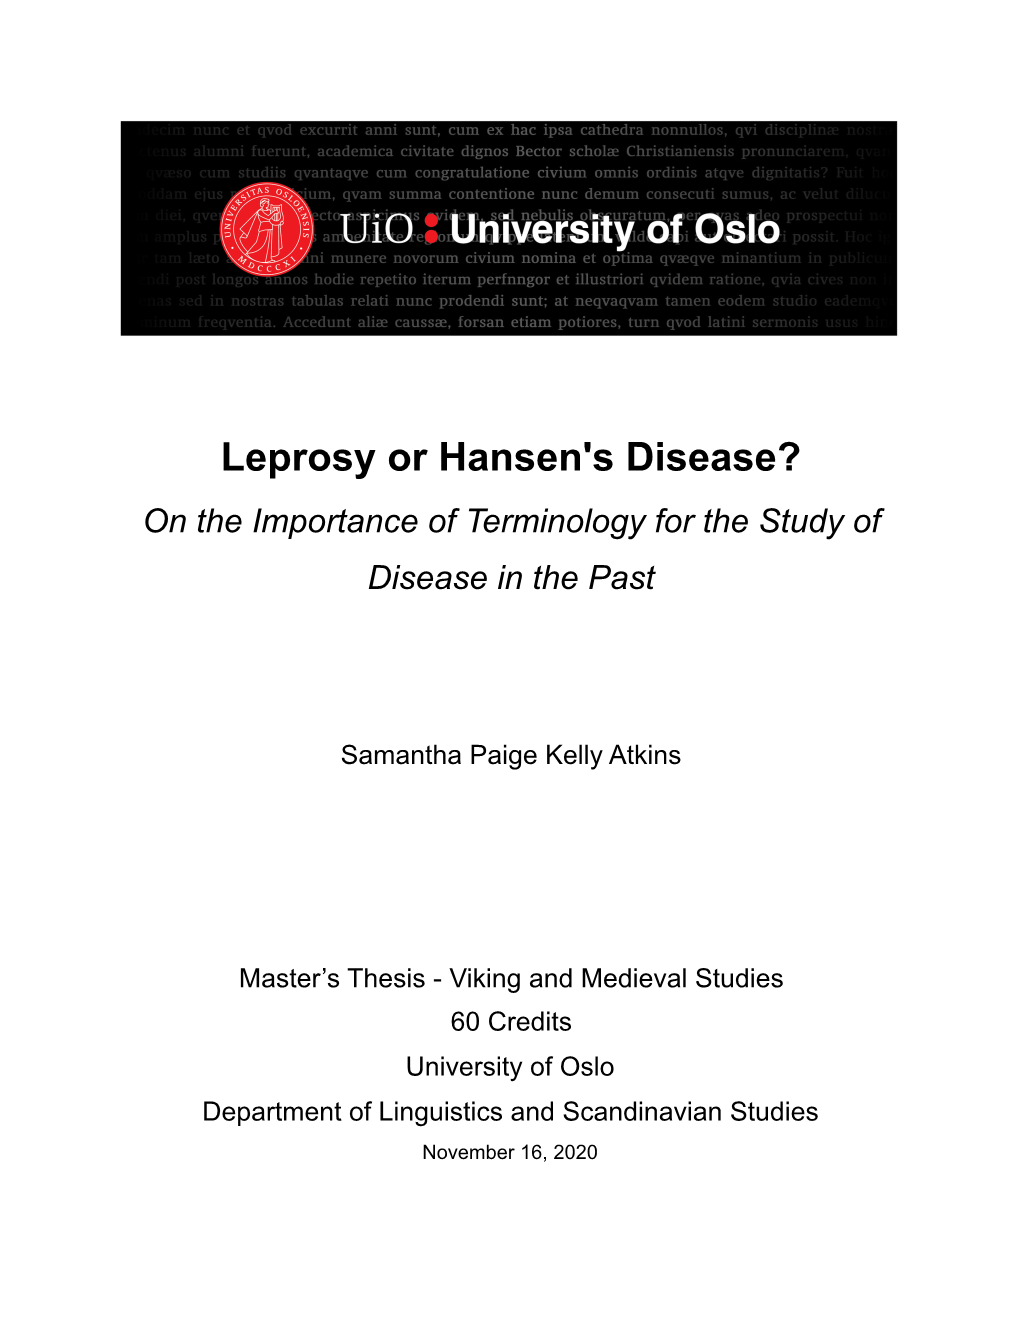 Leprosy Or Hansen's Disease? on the Importance of Terminology for the Study of Disease in the Past